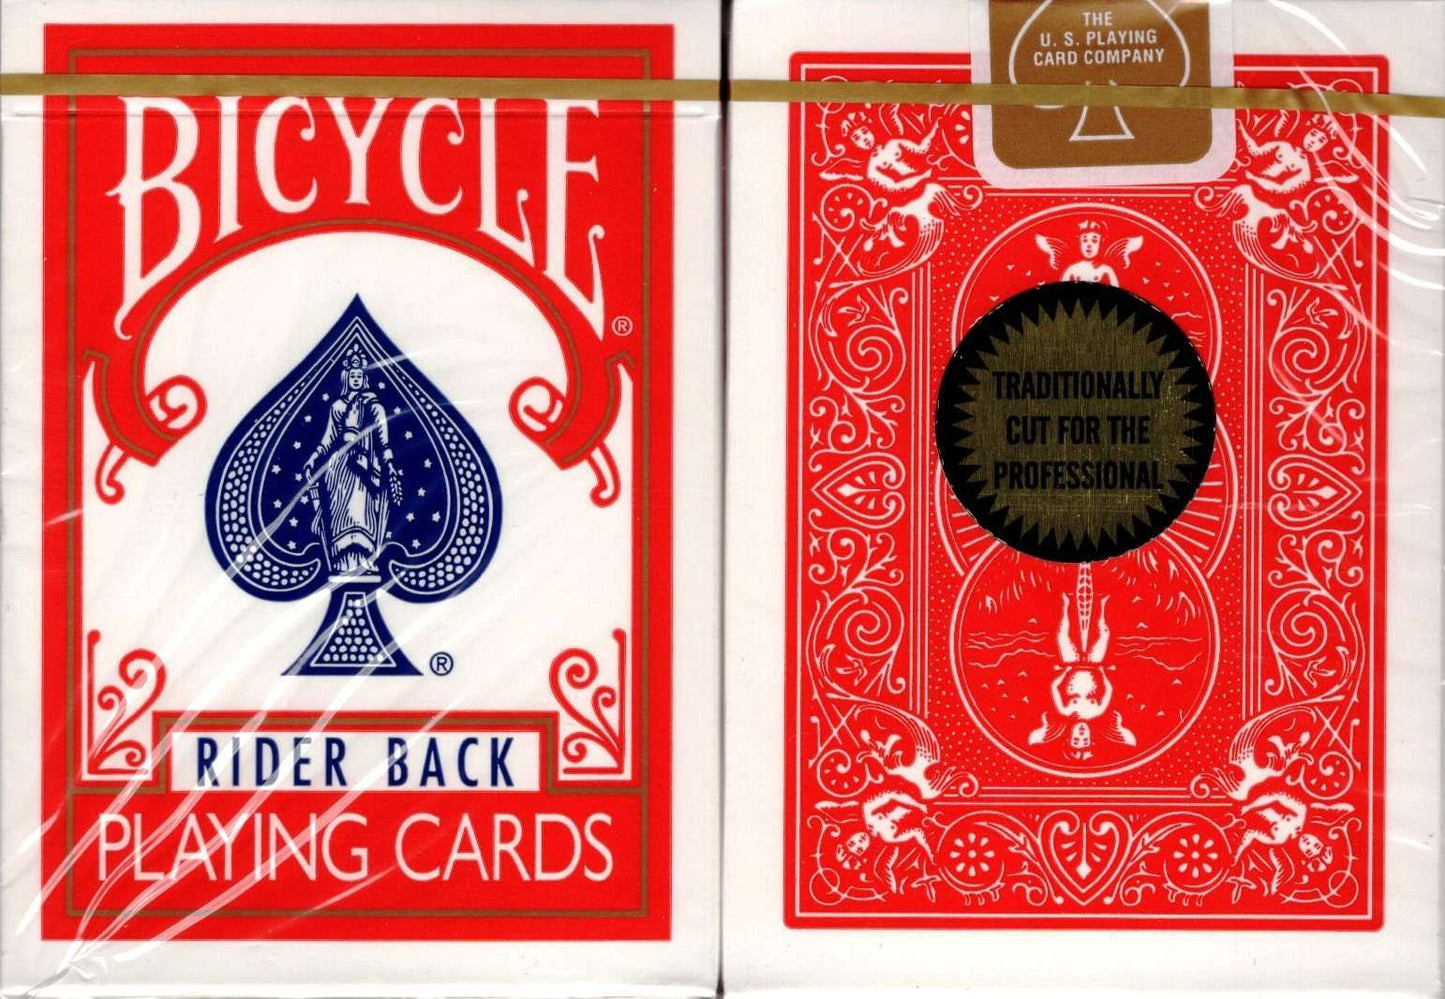 PlayingCardDecks.com-Gold Standard 808 Red Bicycle Playing Cards